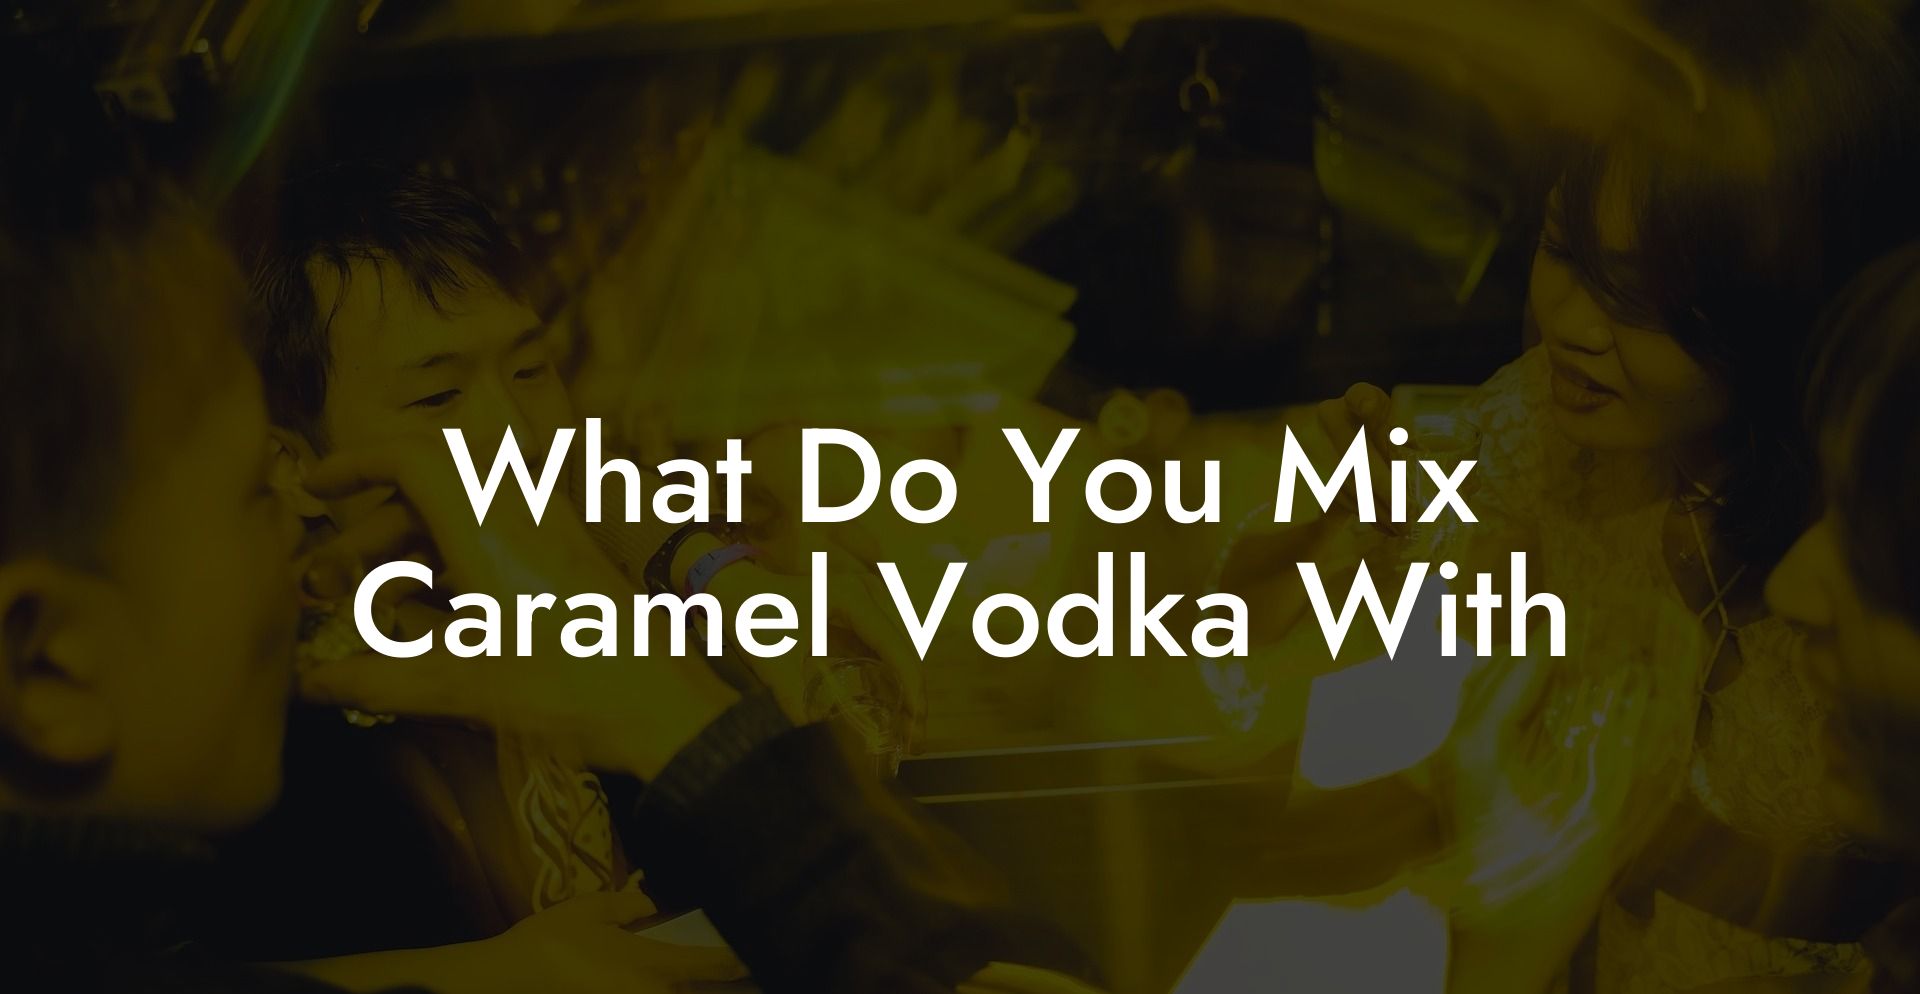 What Do You Mix Caramel Vodka With